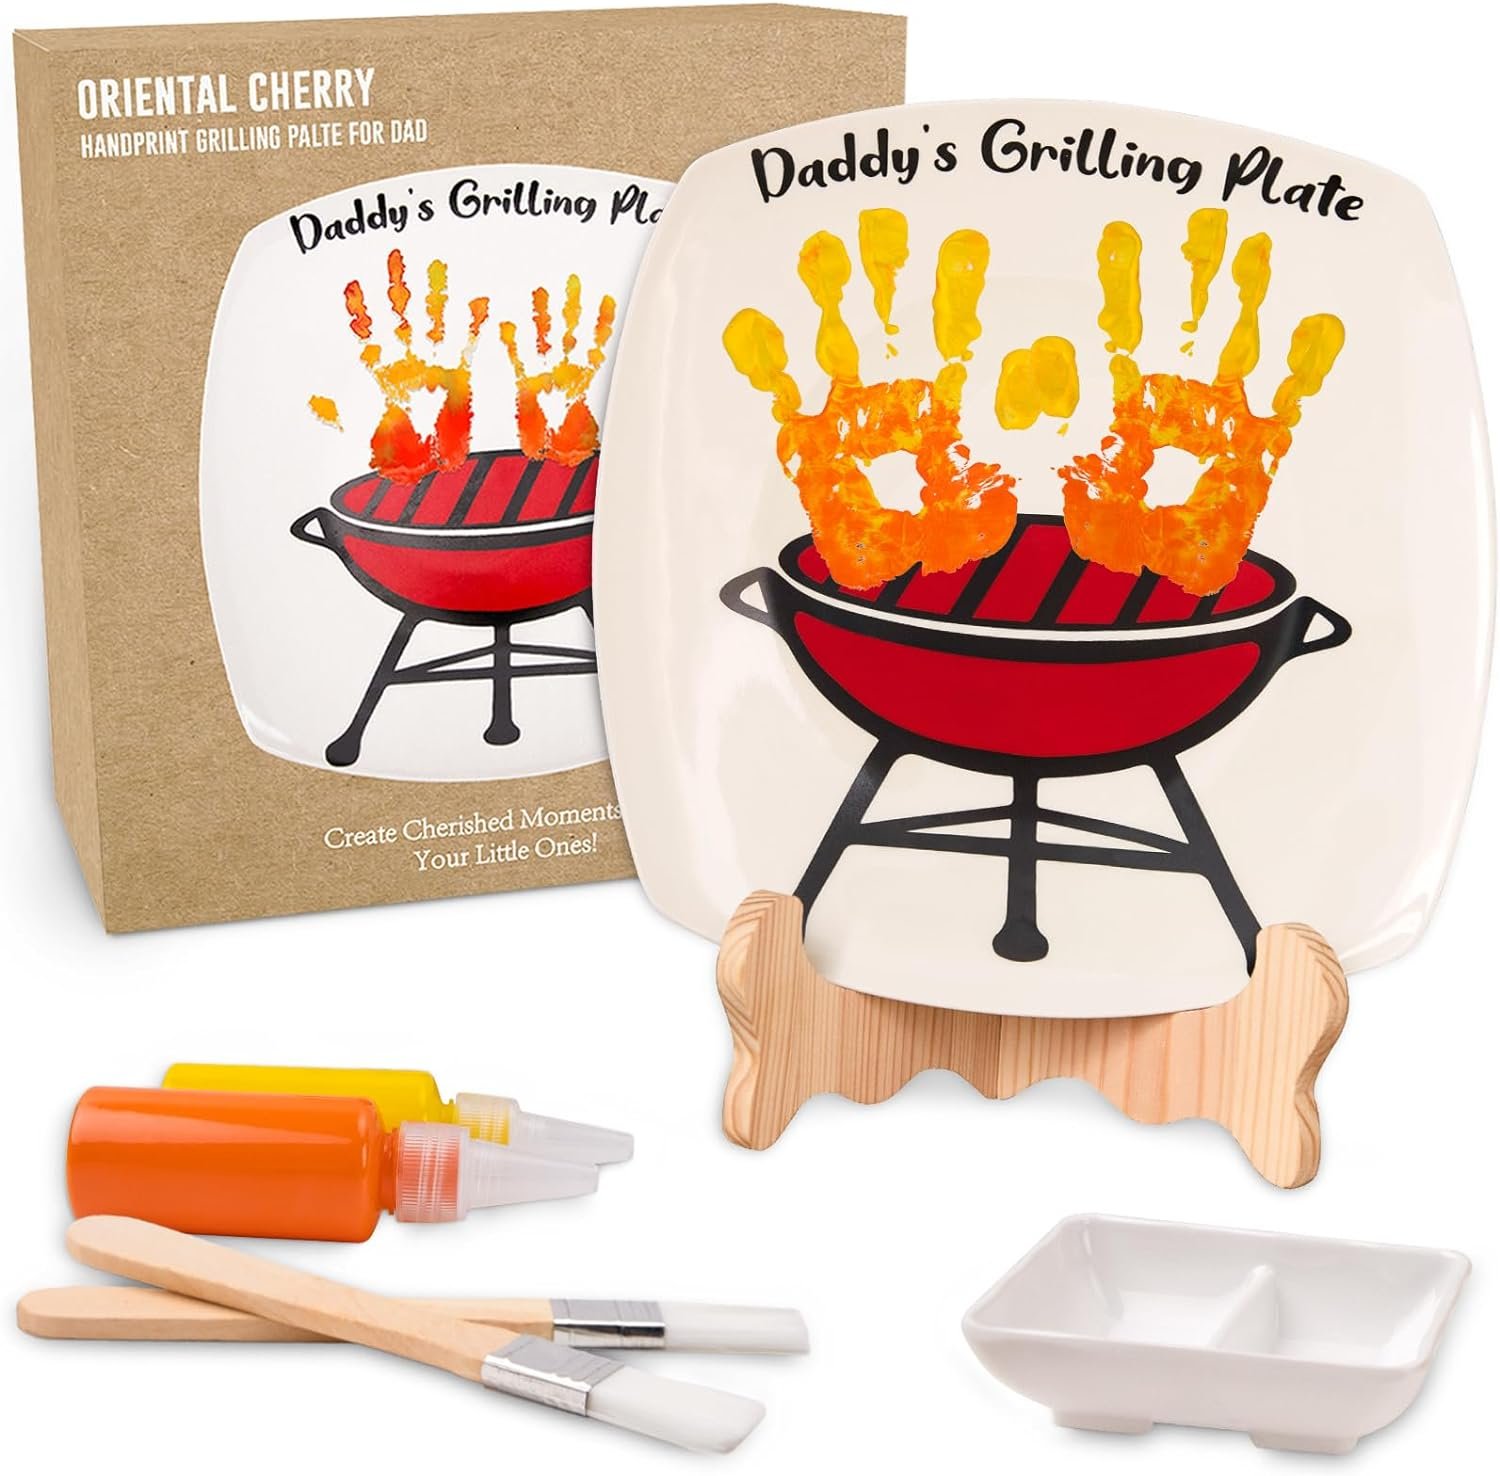 ORIENTAL CHERRY Fathers Day Gifts - DIY Daddys Grilling Plate with Handprint - Personalized Step Dad Gifts from Wife Kids - Funny BBQ Crafts Birthday Present Ideas for First Papa from Daughter Son